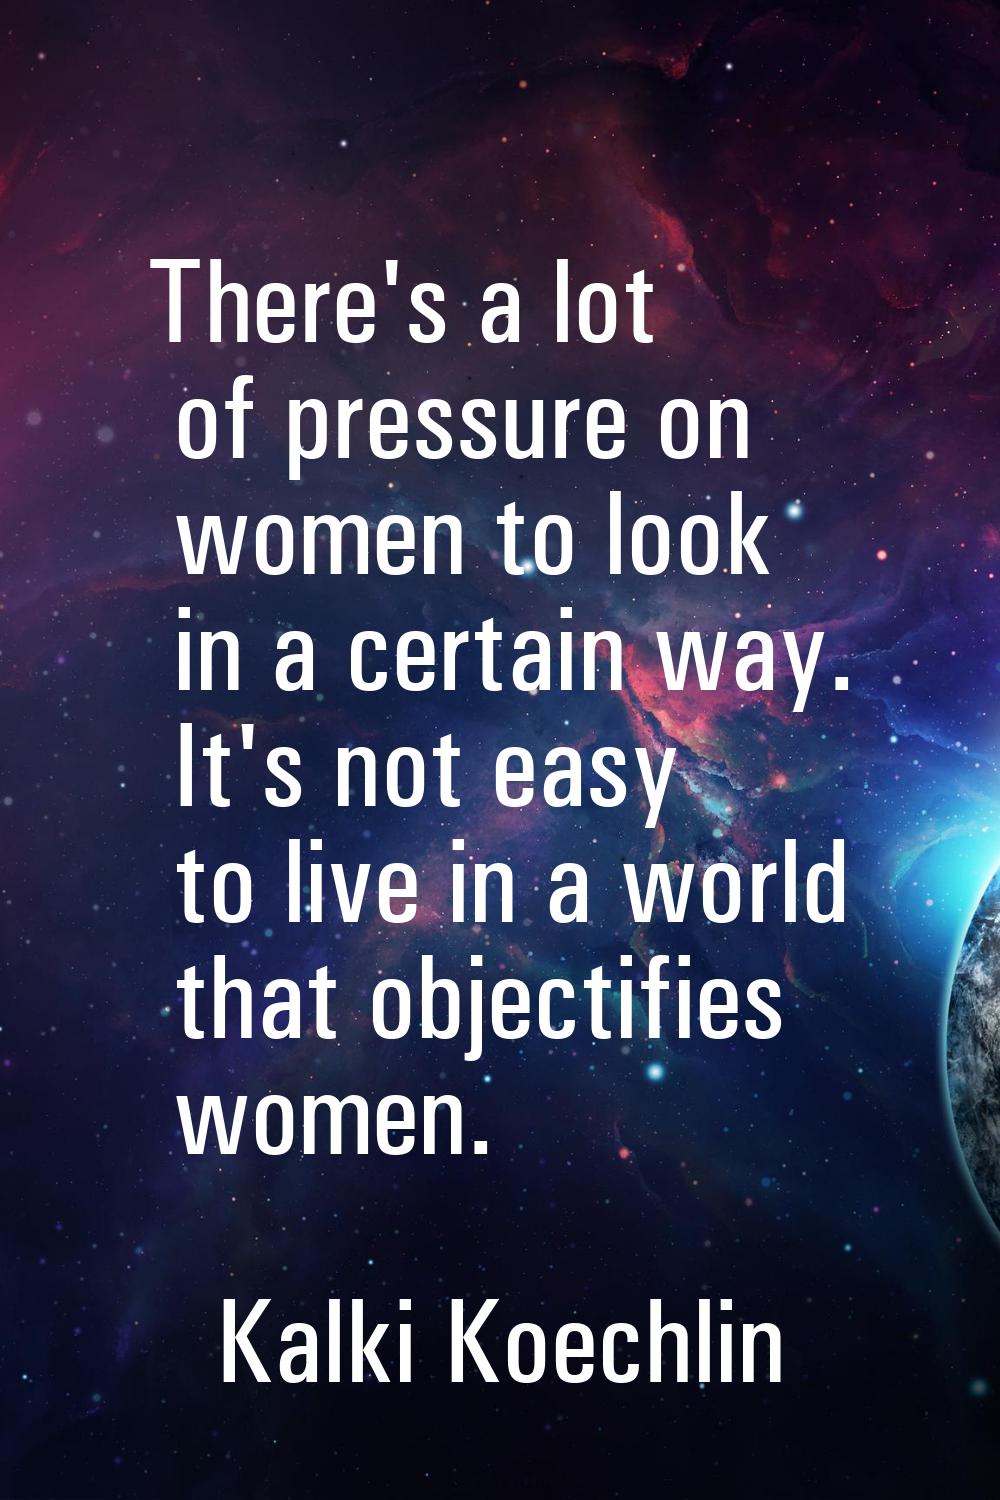 There's a lot of pressure on women to look in a certain way. It's not easy to live in a world that 